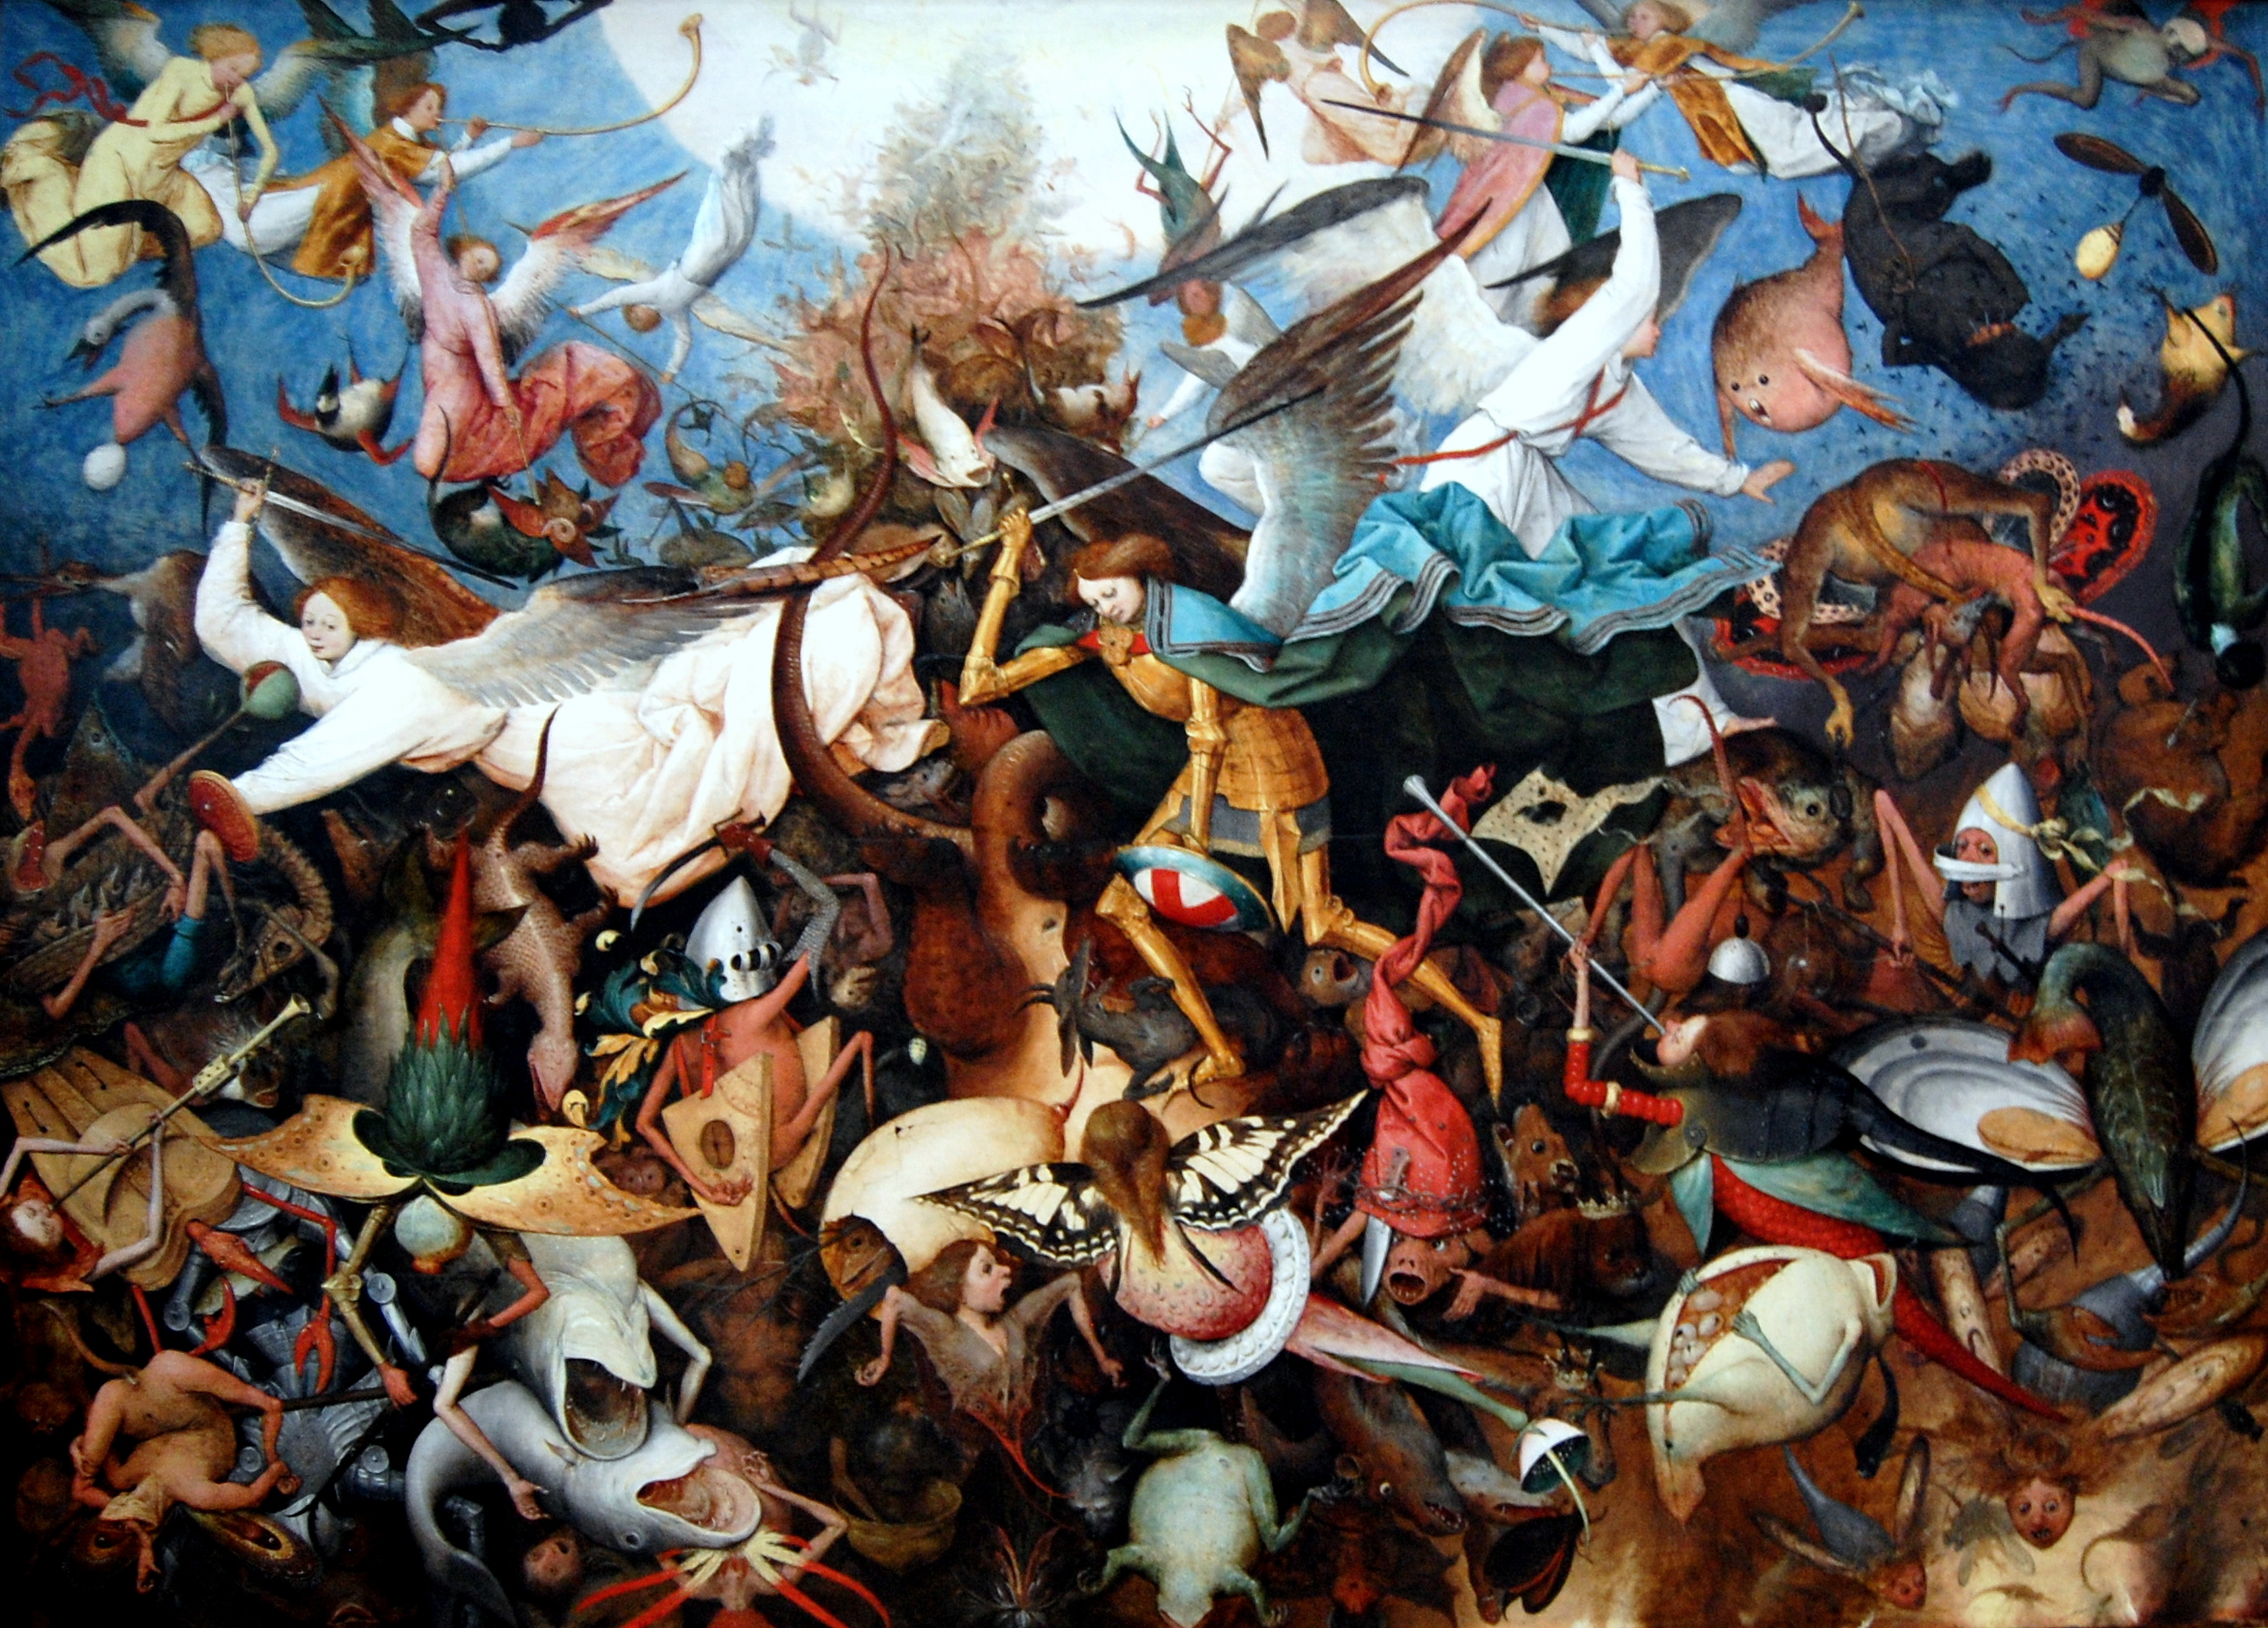 The Fall of the Rebel Angels, Pieter Bruegel il Vecchio, 1562, photo by loungerie on Flickr